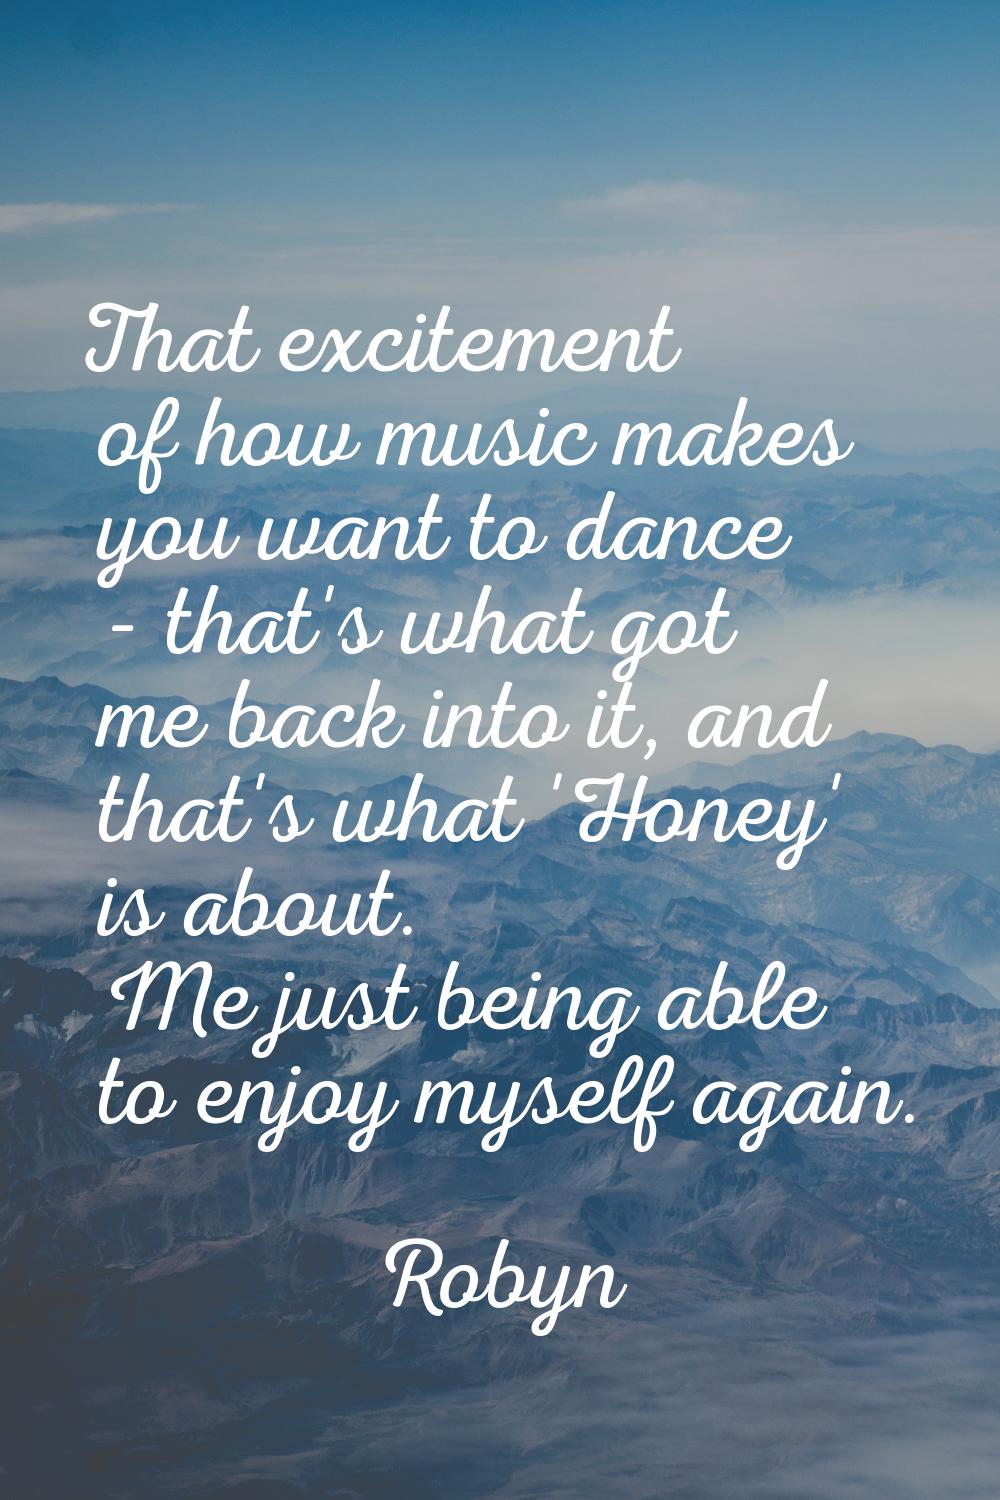 That excitement of how music makes you want to dance - that's what got me back into it, and that's 